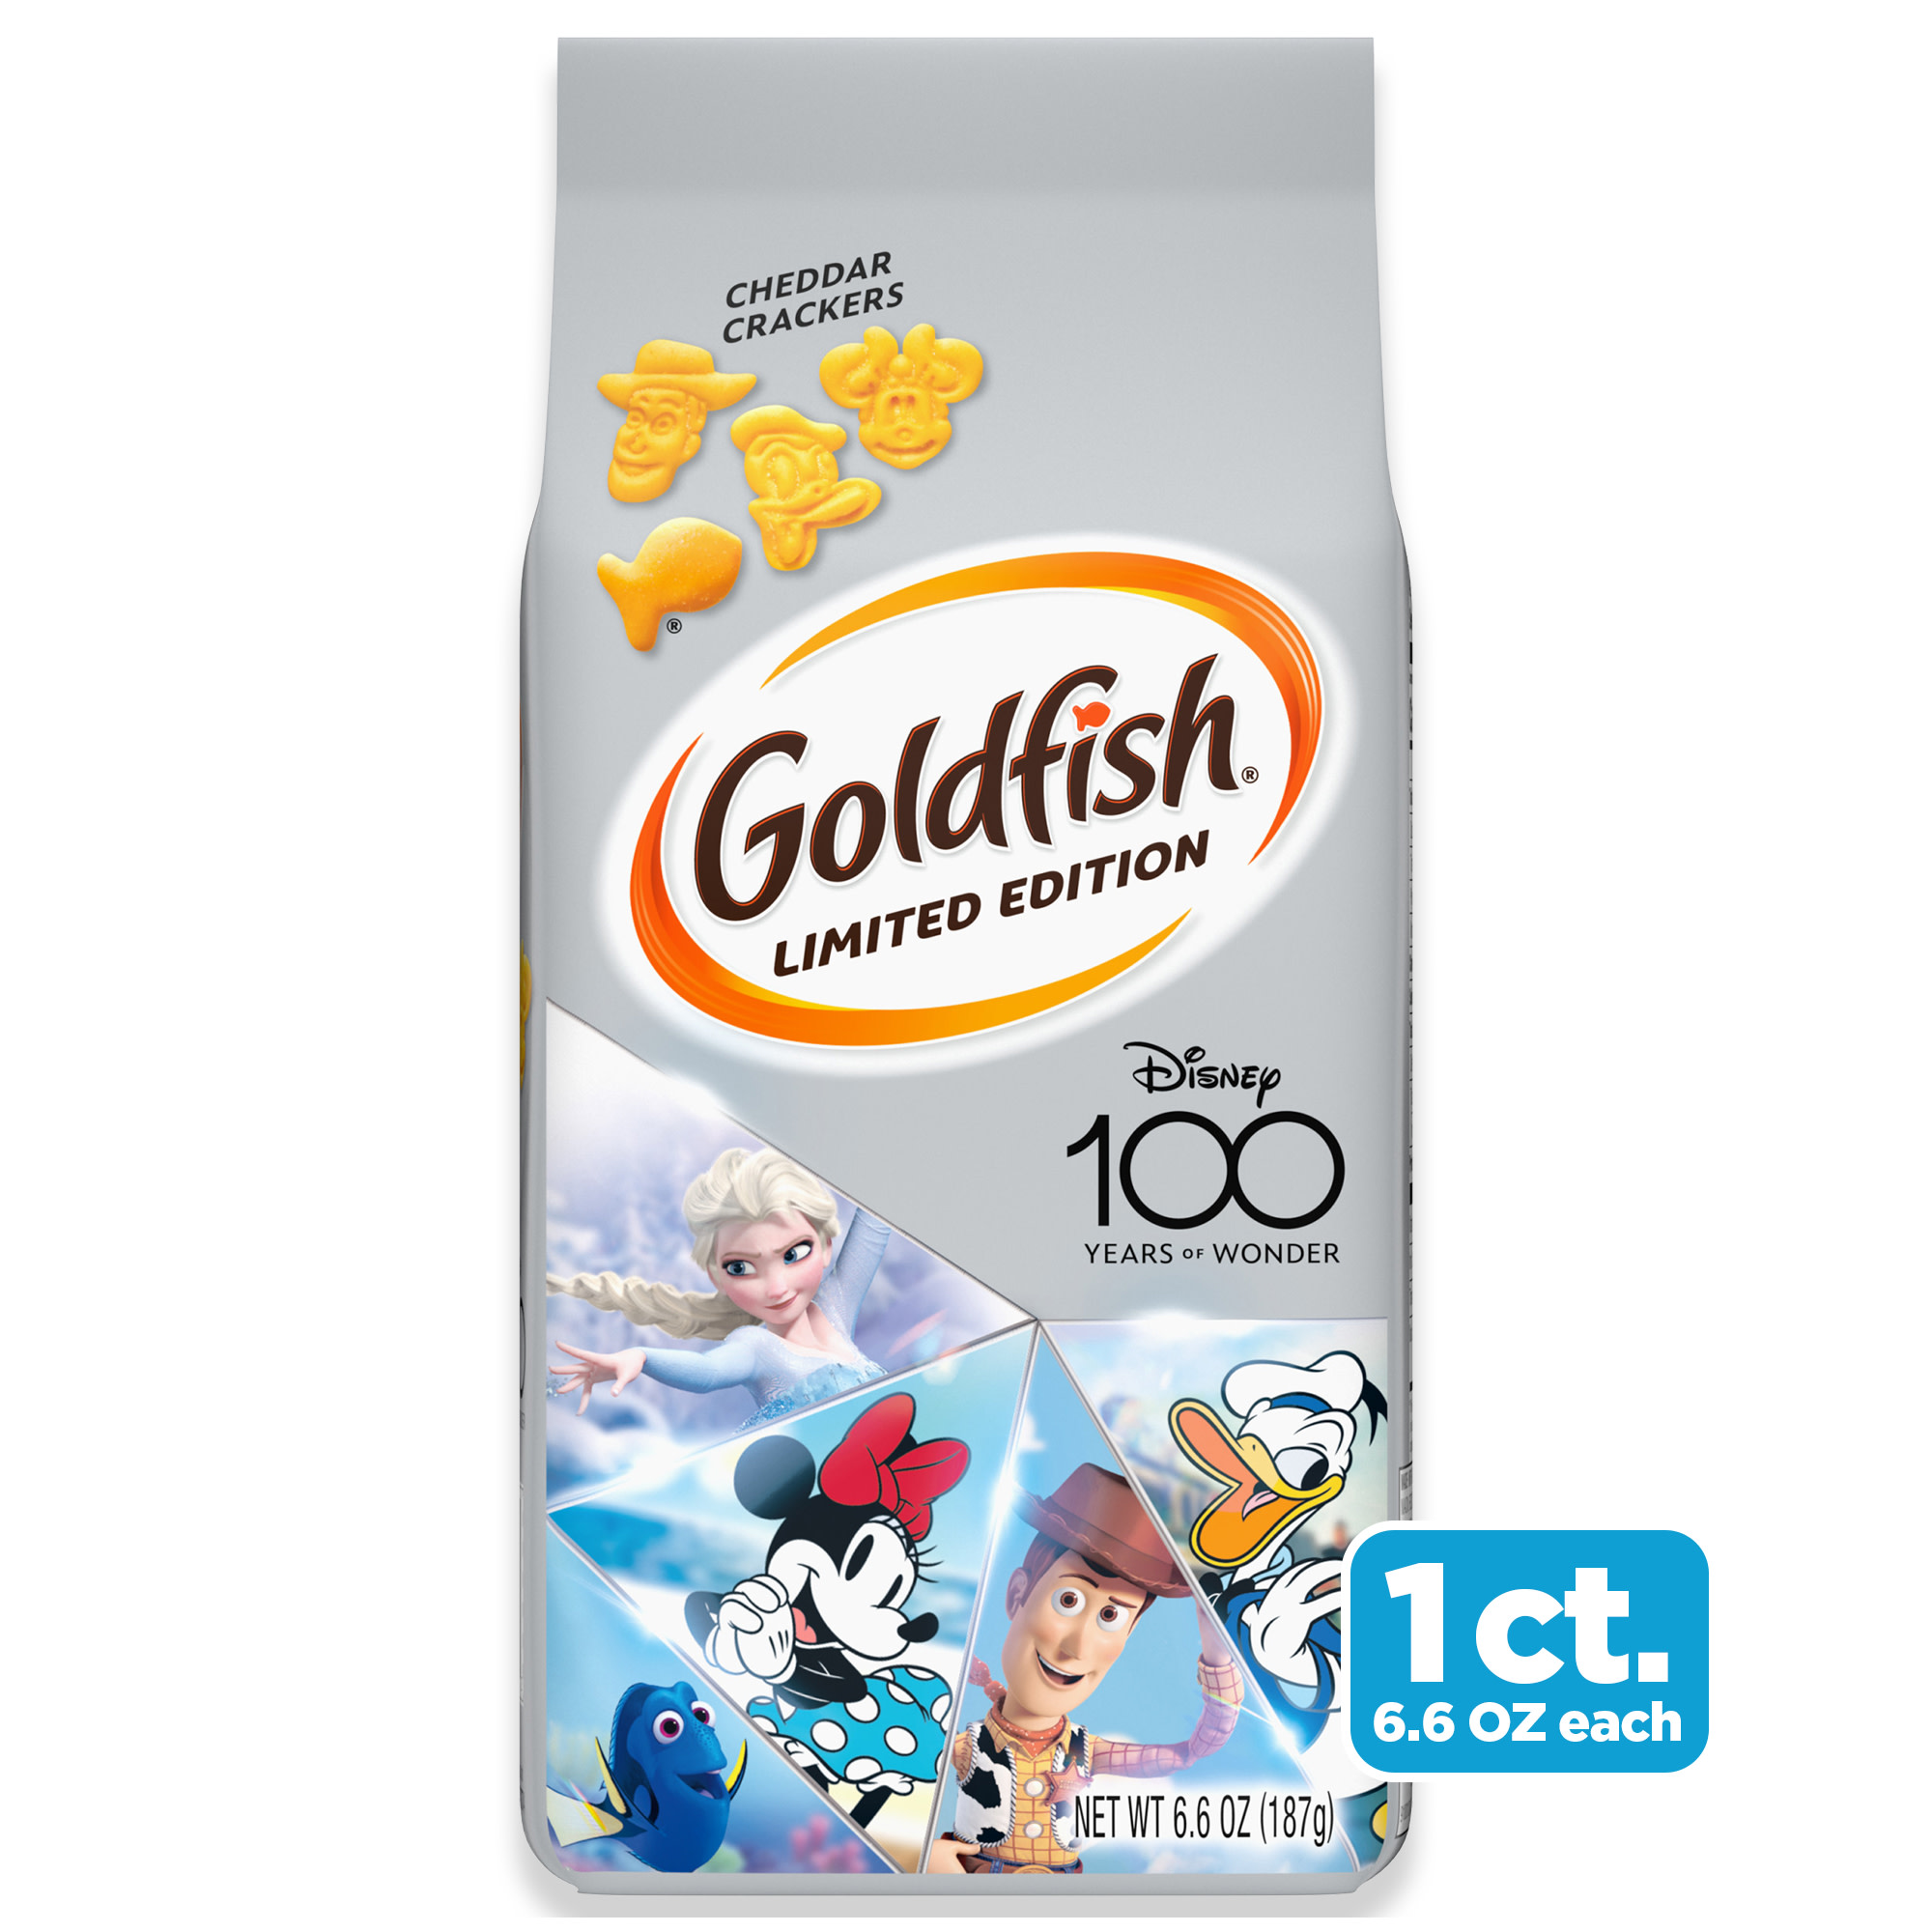 Goldfish Limited Edition Disney 100th Cheddar Crackers, Snack Crackers, 6.6 oz bag - image 1 of 10